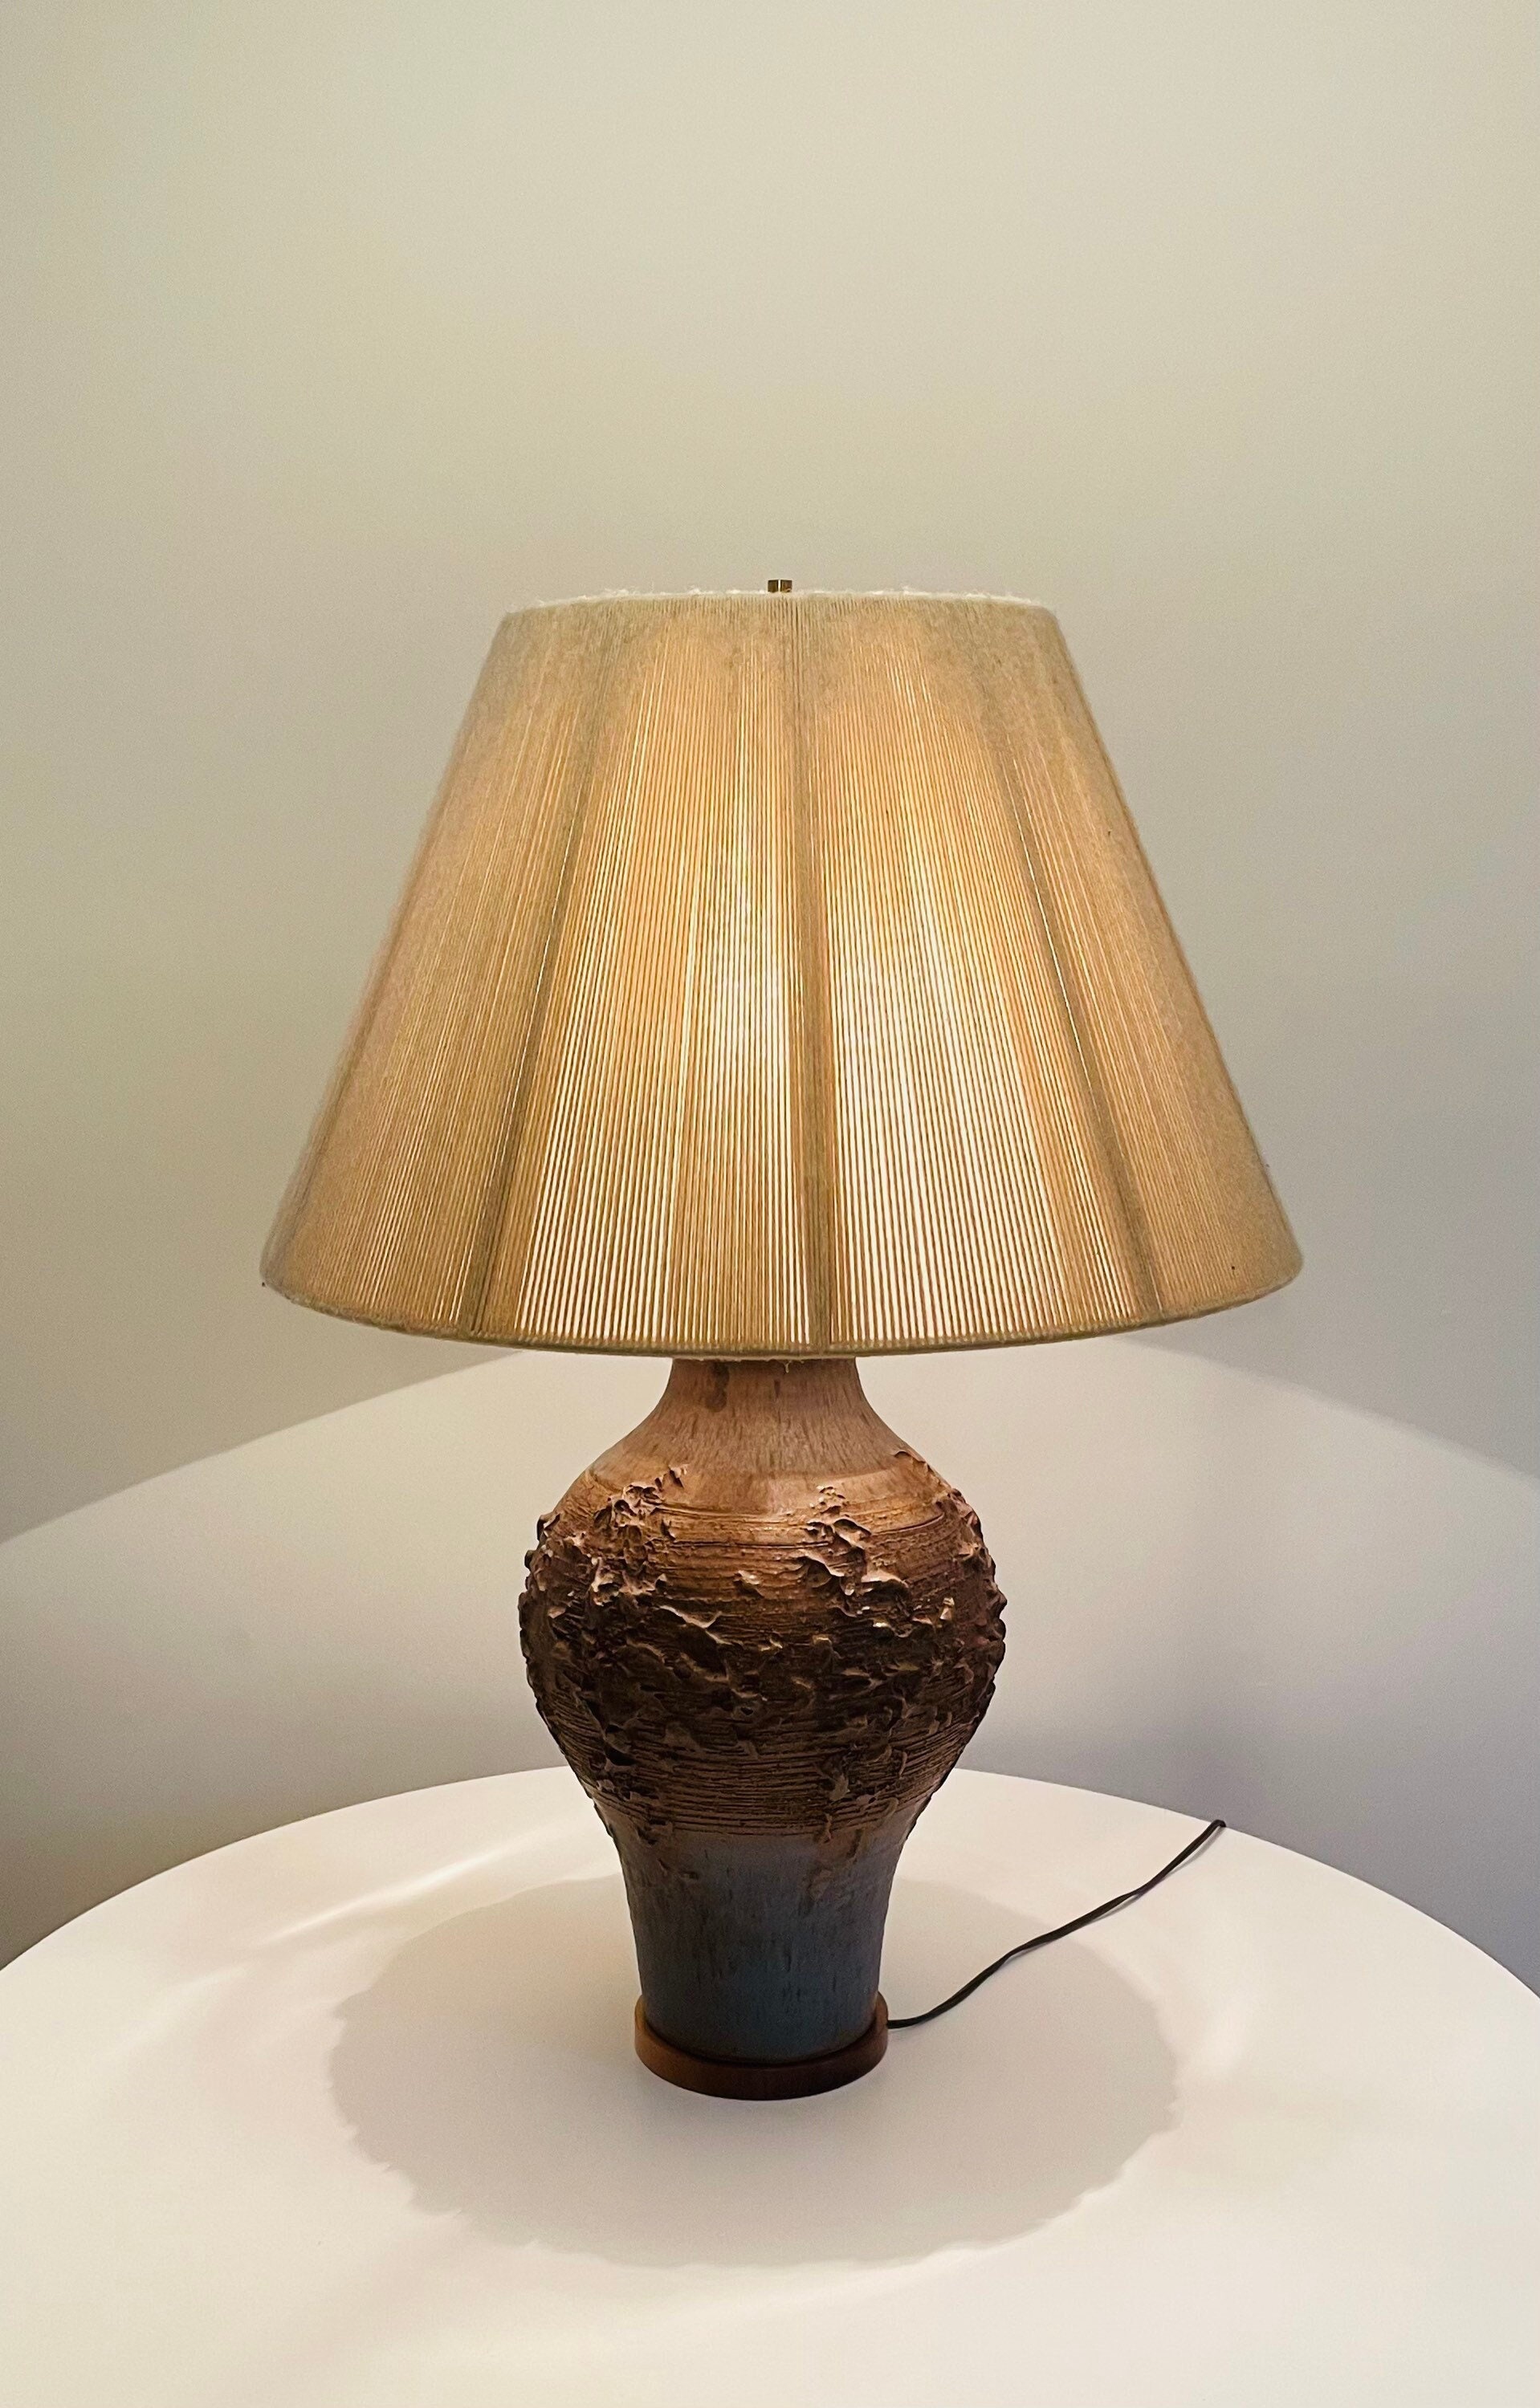 Floor Lamp with Flexible Neck from Mohr Light, 1960s for sale at Pamono